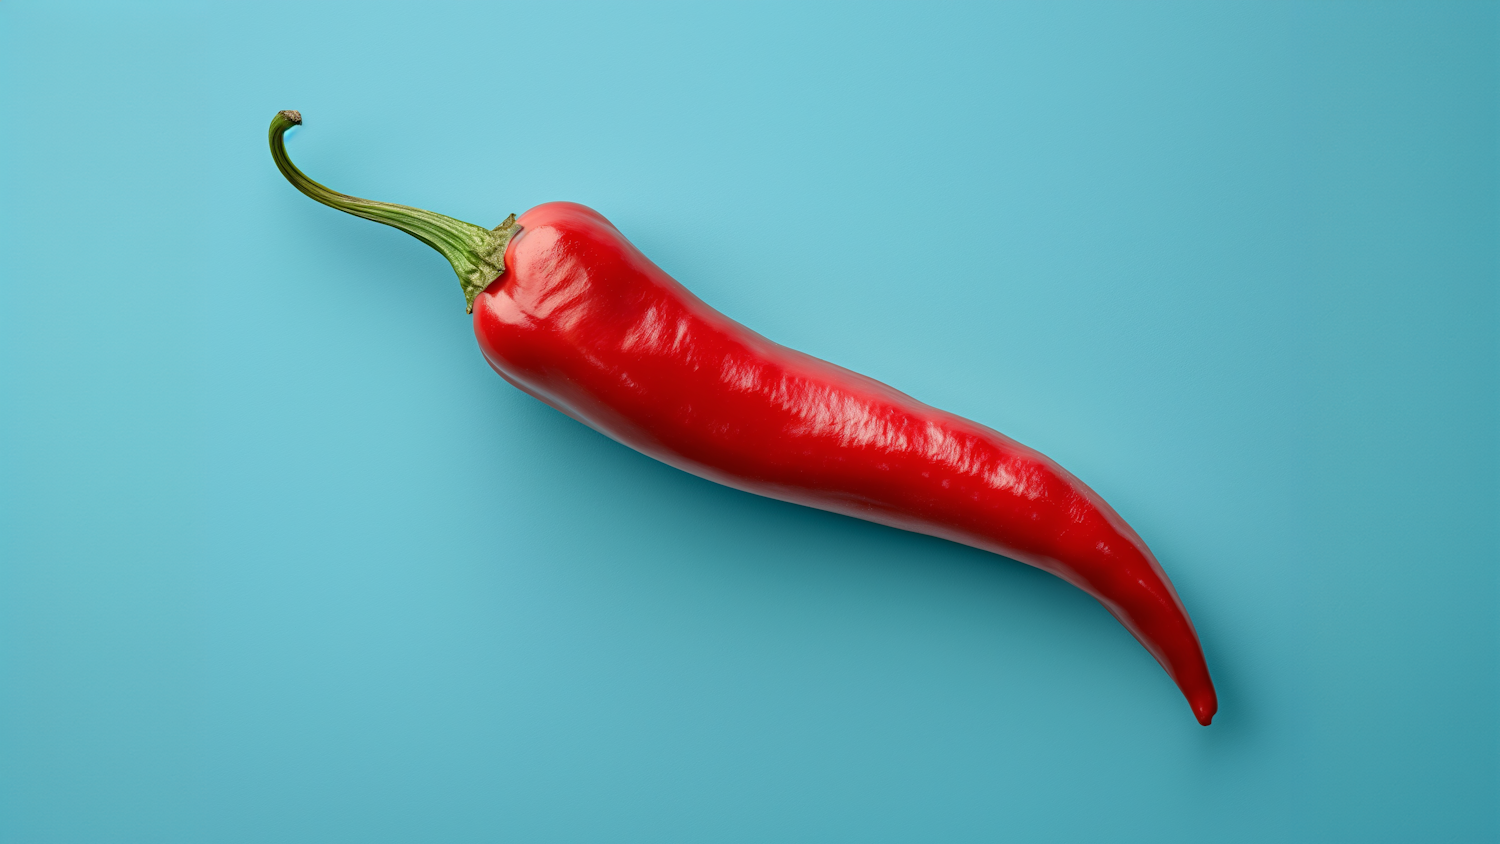 Vibrant Red Chili on Blue Background